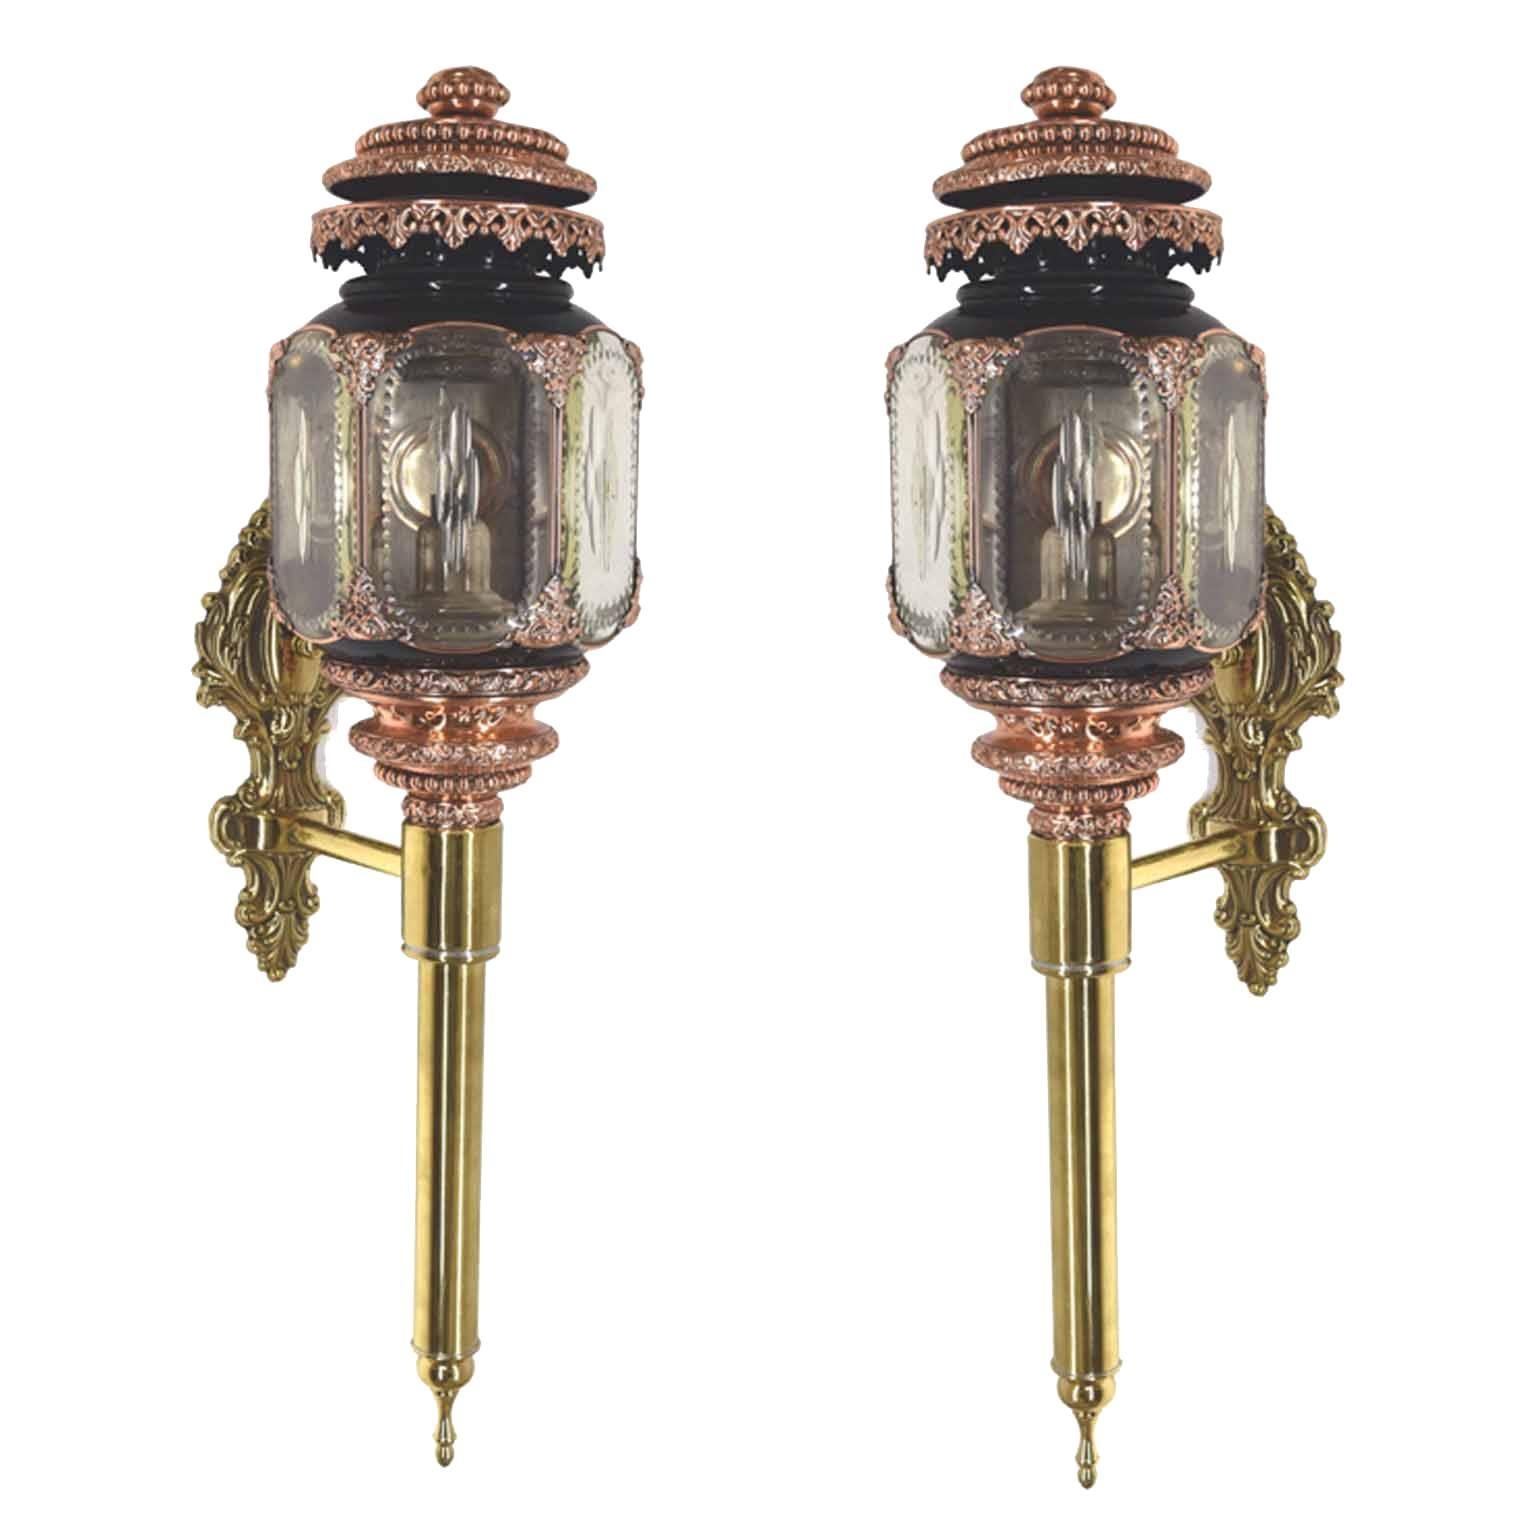 Superb Pair of Antique English Brass Carriage Lamps of Large Size, circa 1850 For Sale